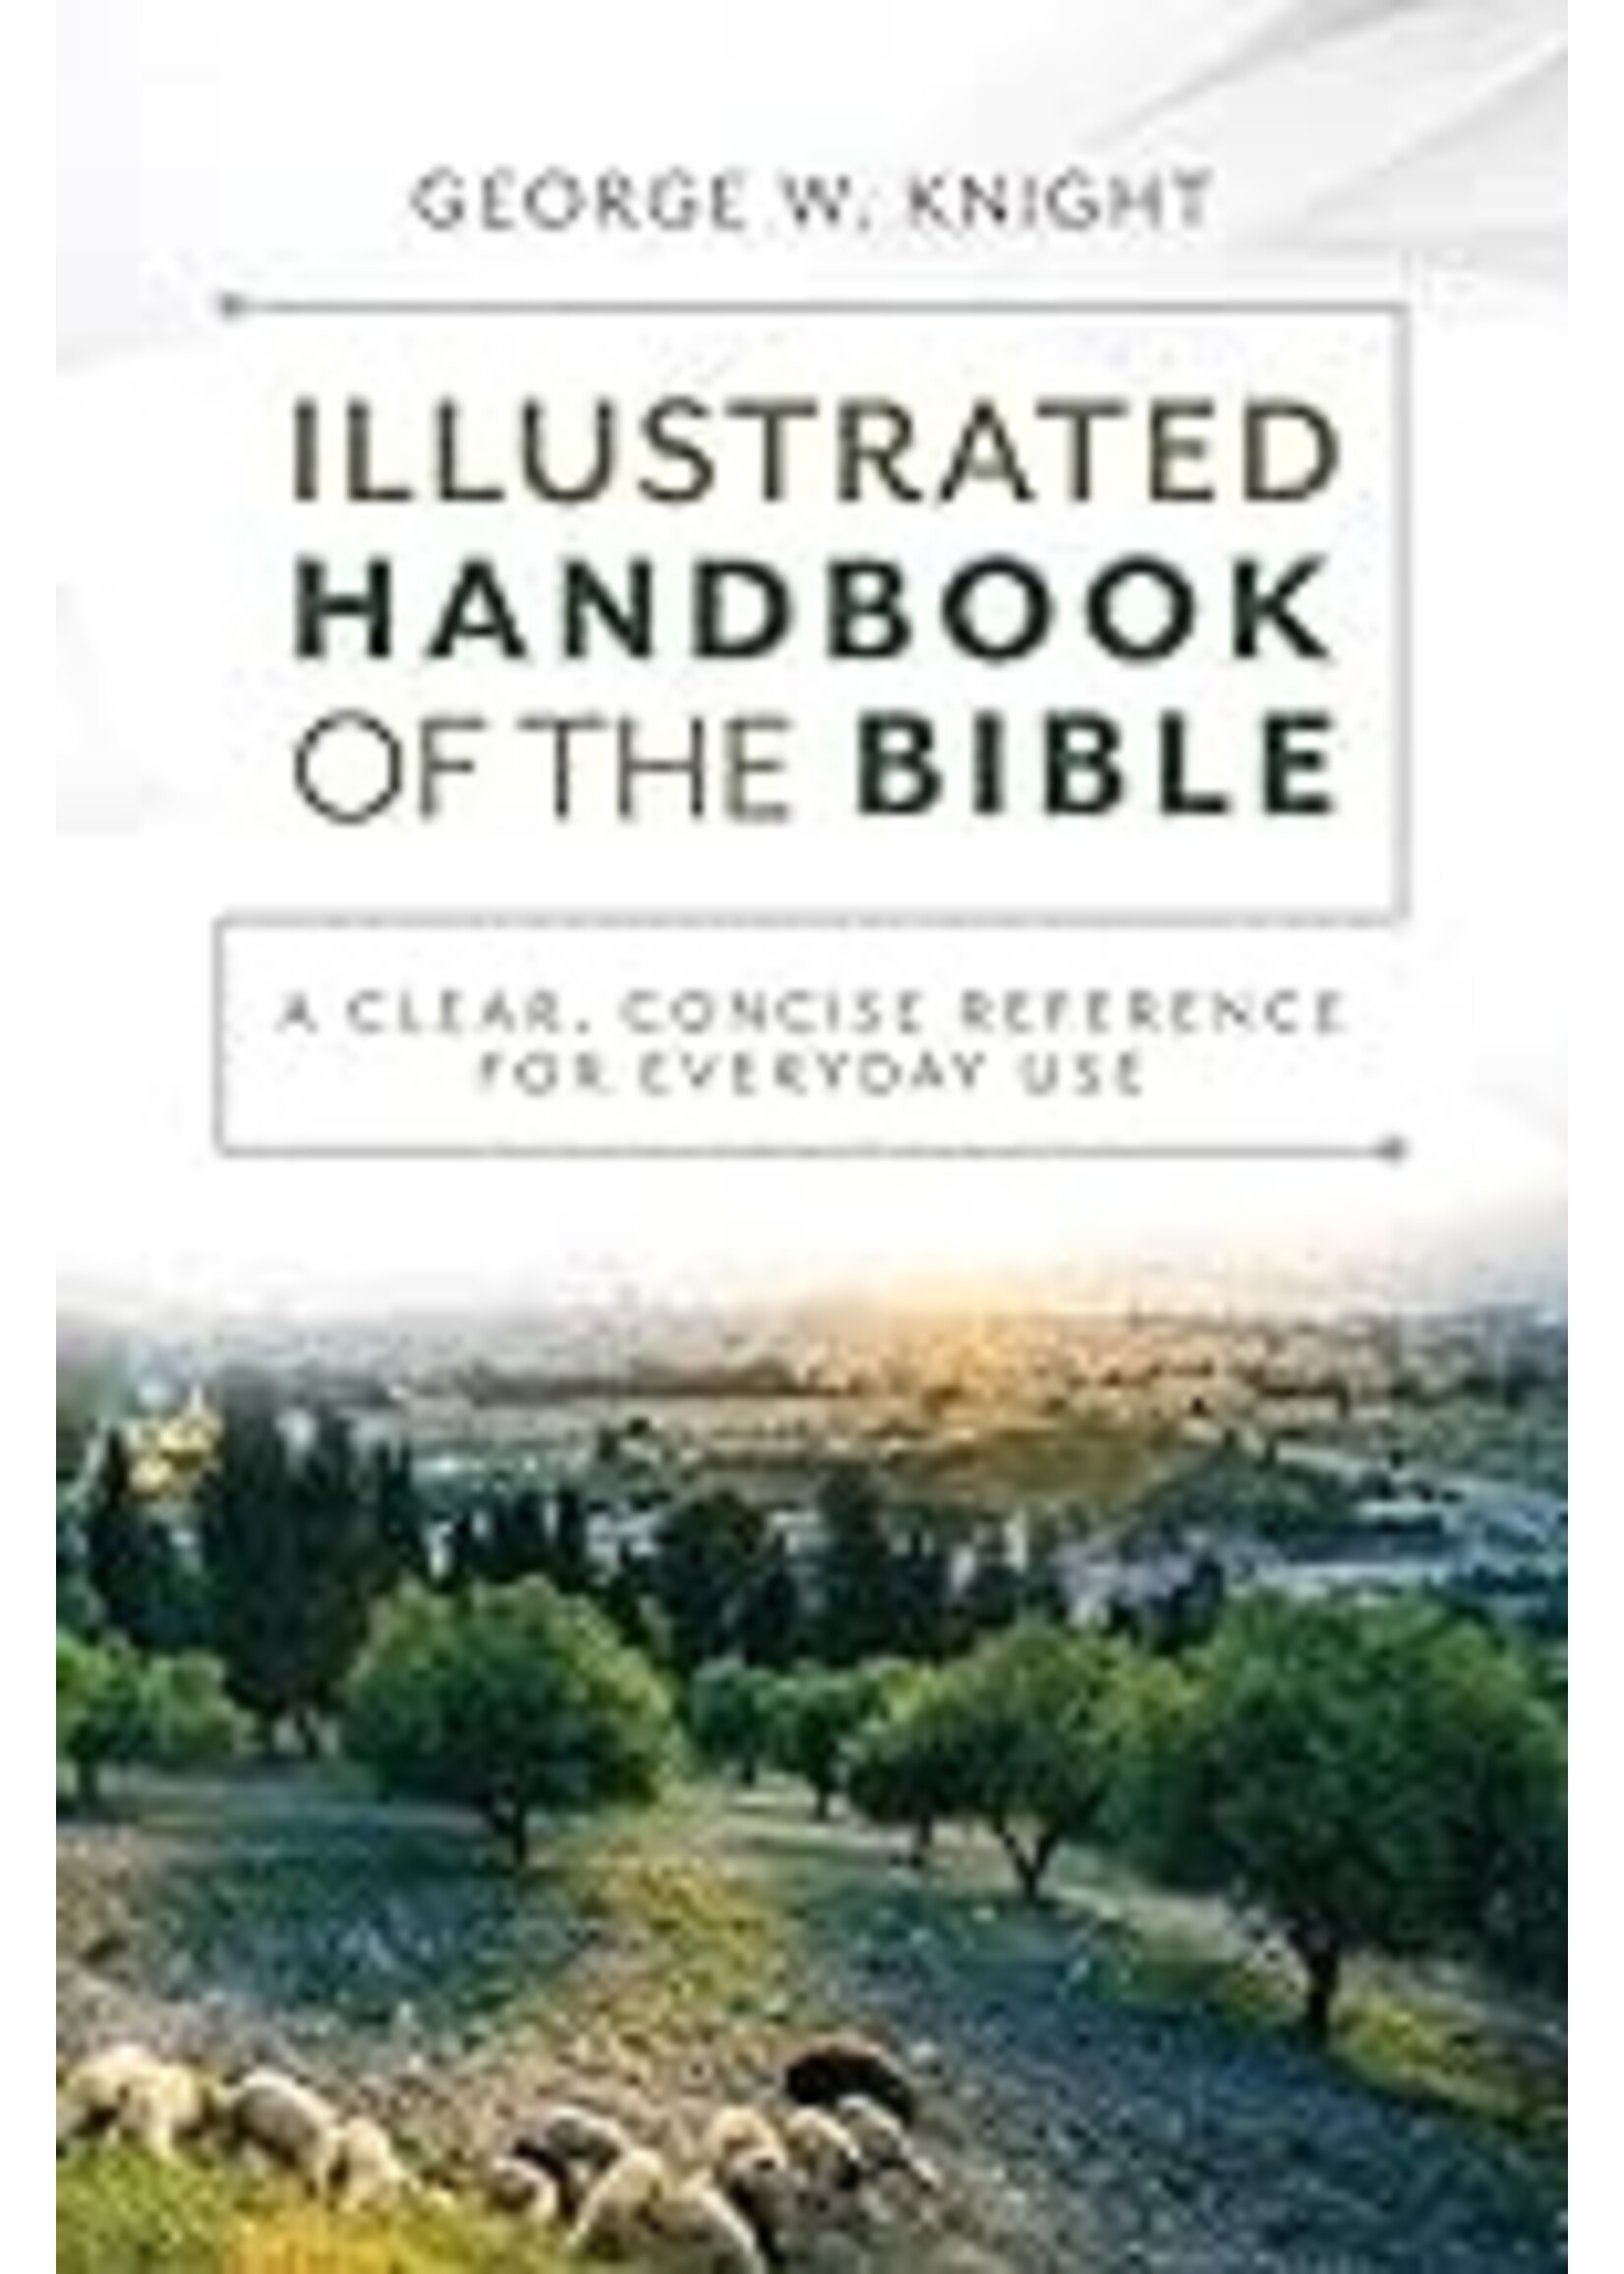 The Illustrated Handbook Of The Bible